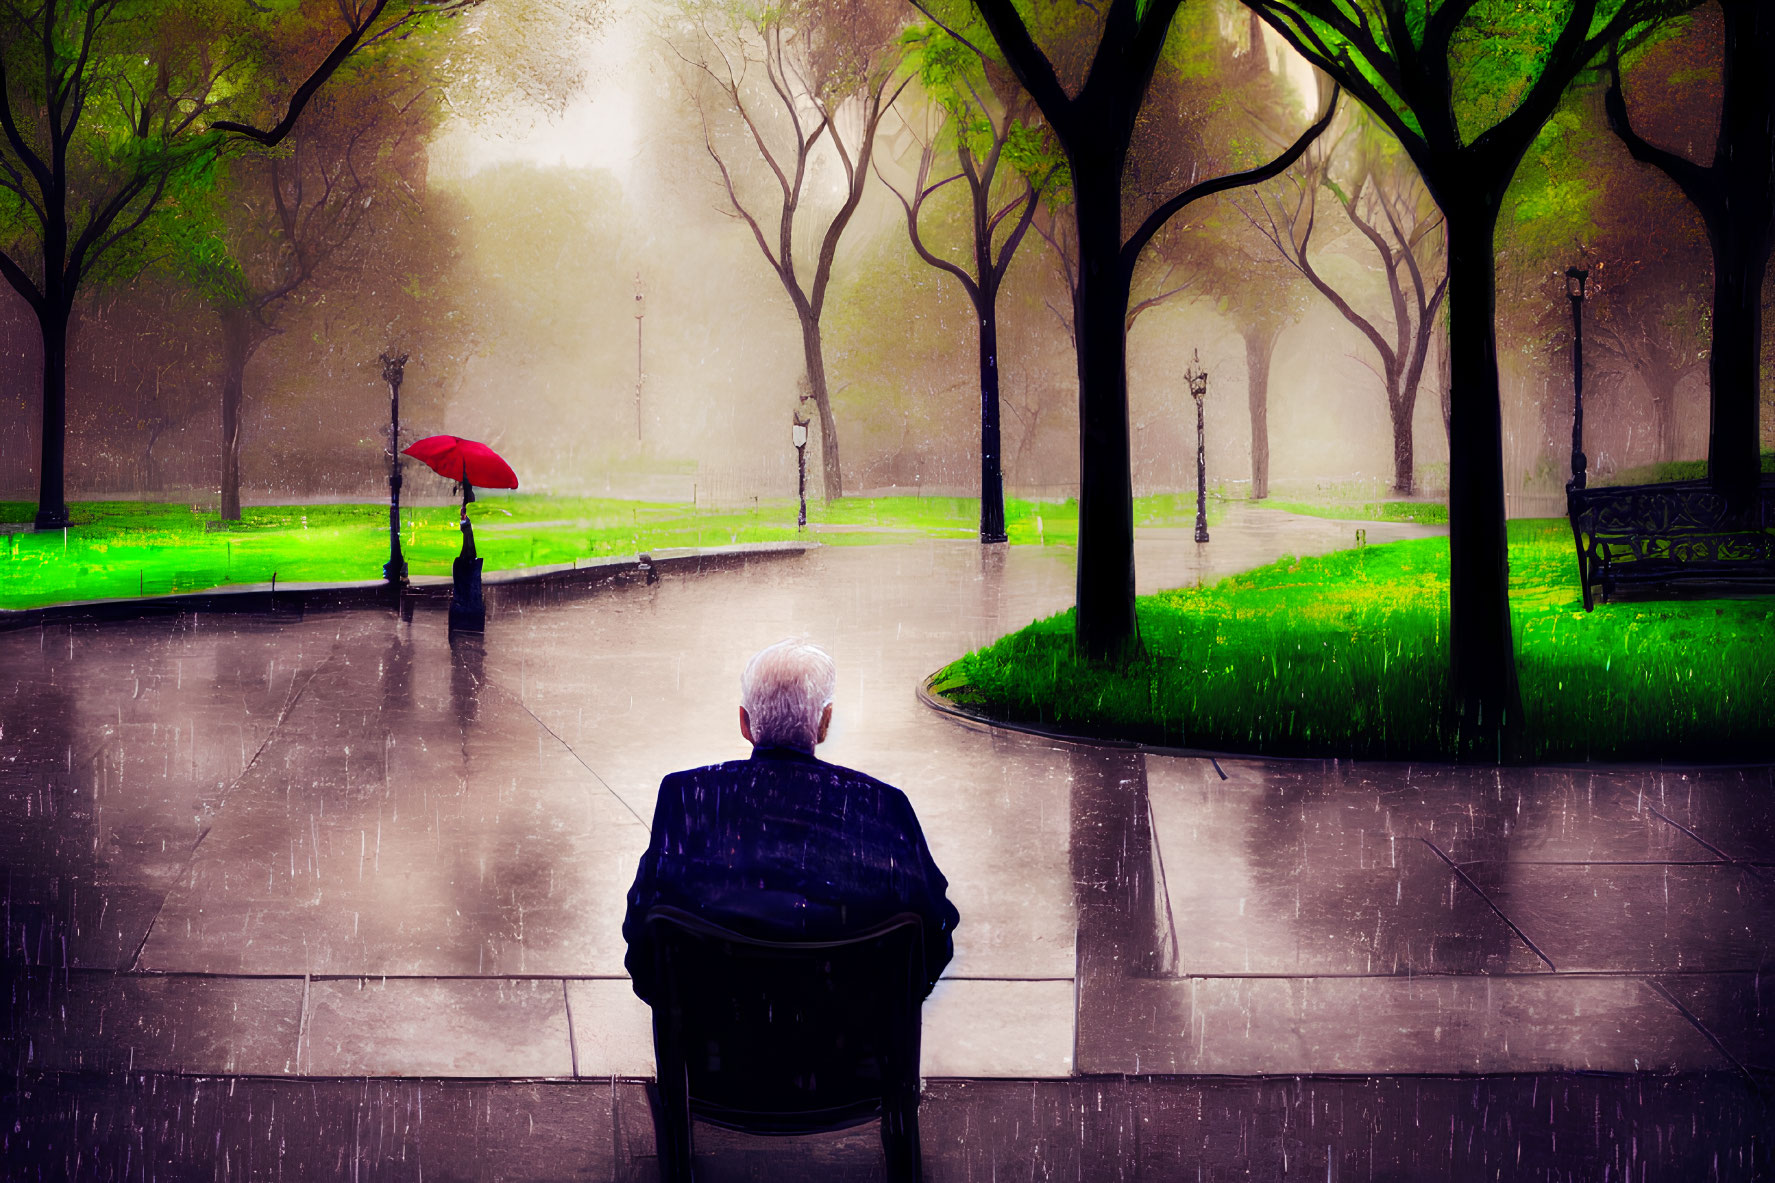 Individual on park bench gazing at person with red umbrella in rainy park